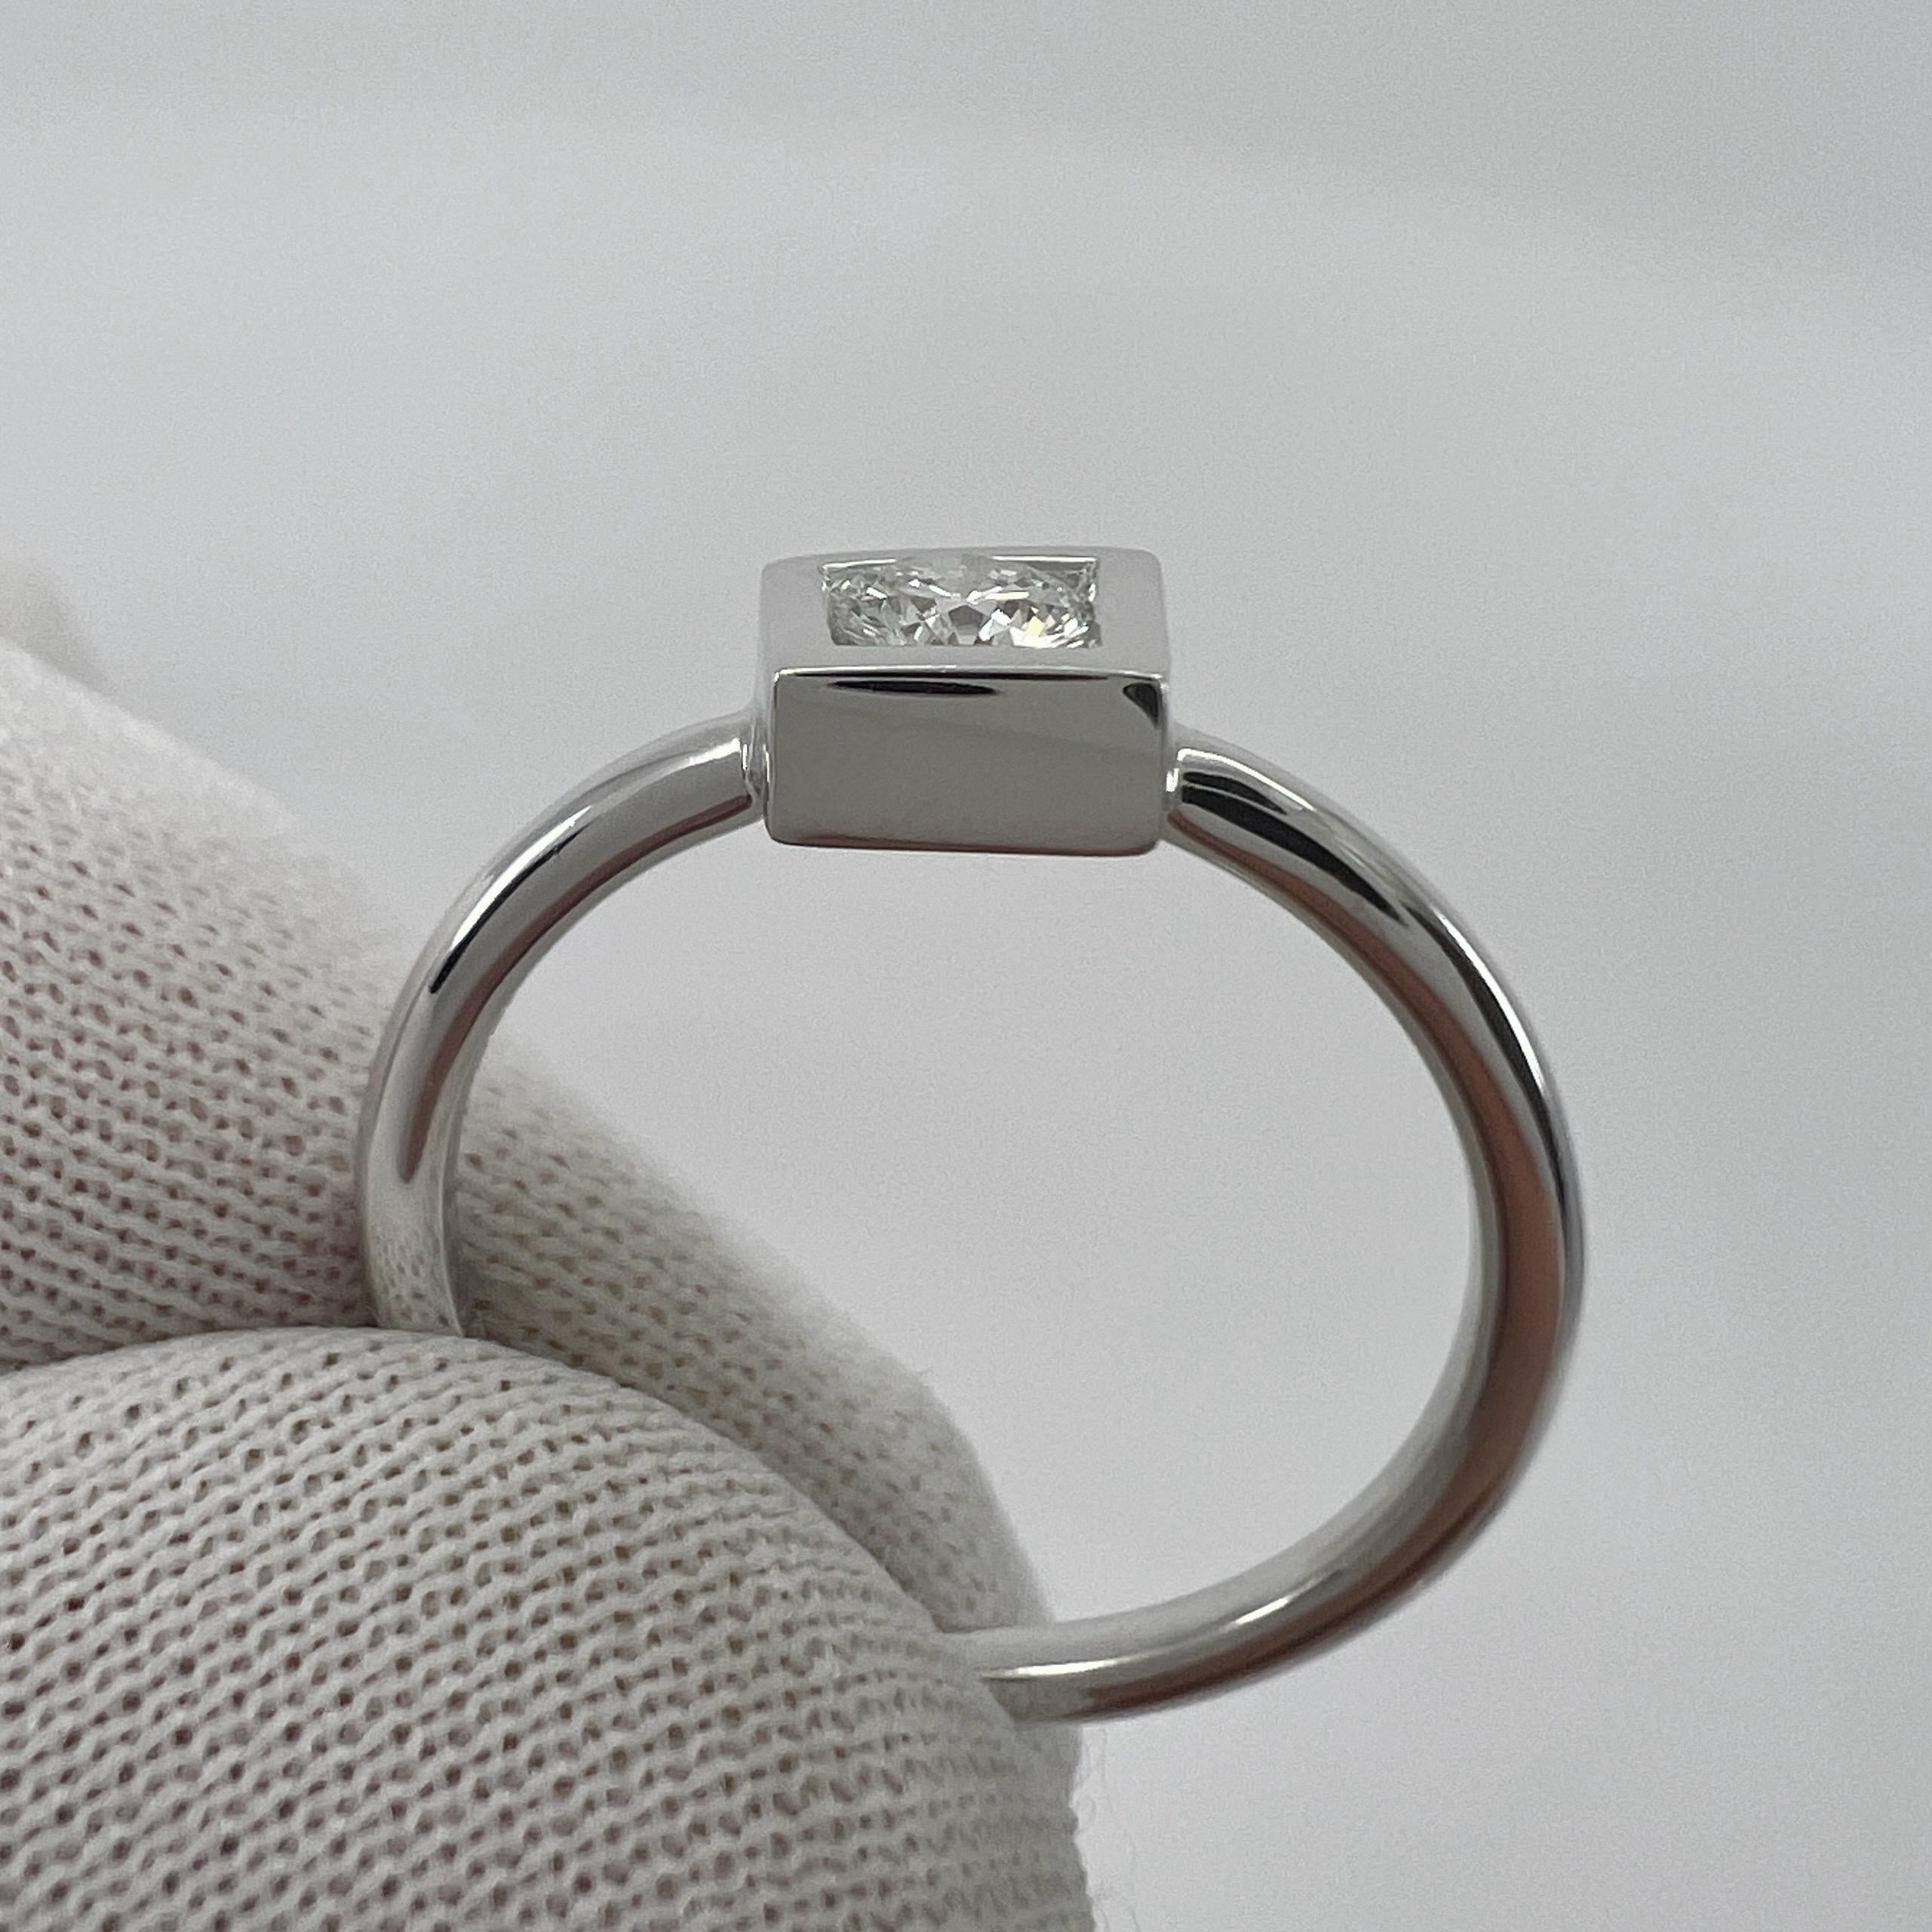 Rare Tiffany & Co Frank Gehry Torque Round Diamond 18k White Gold Solitaire Ring For Sale 3